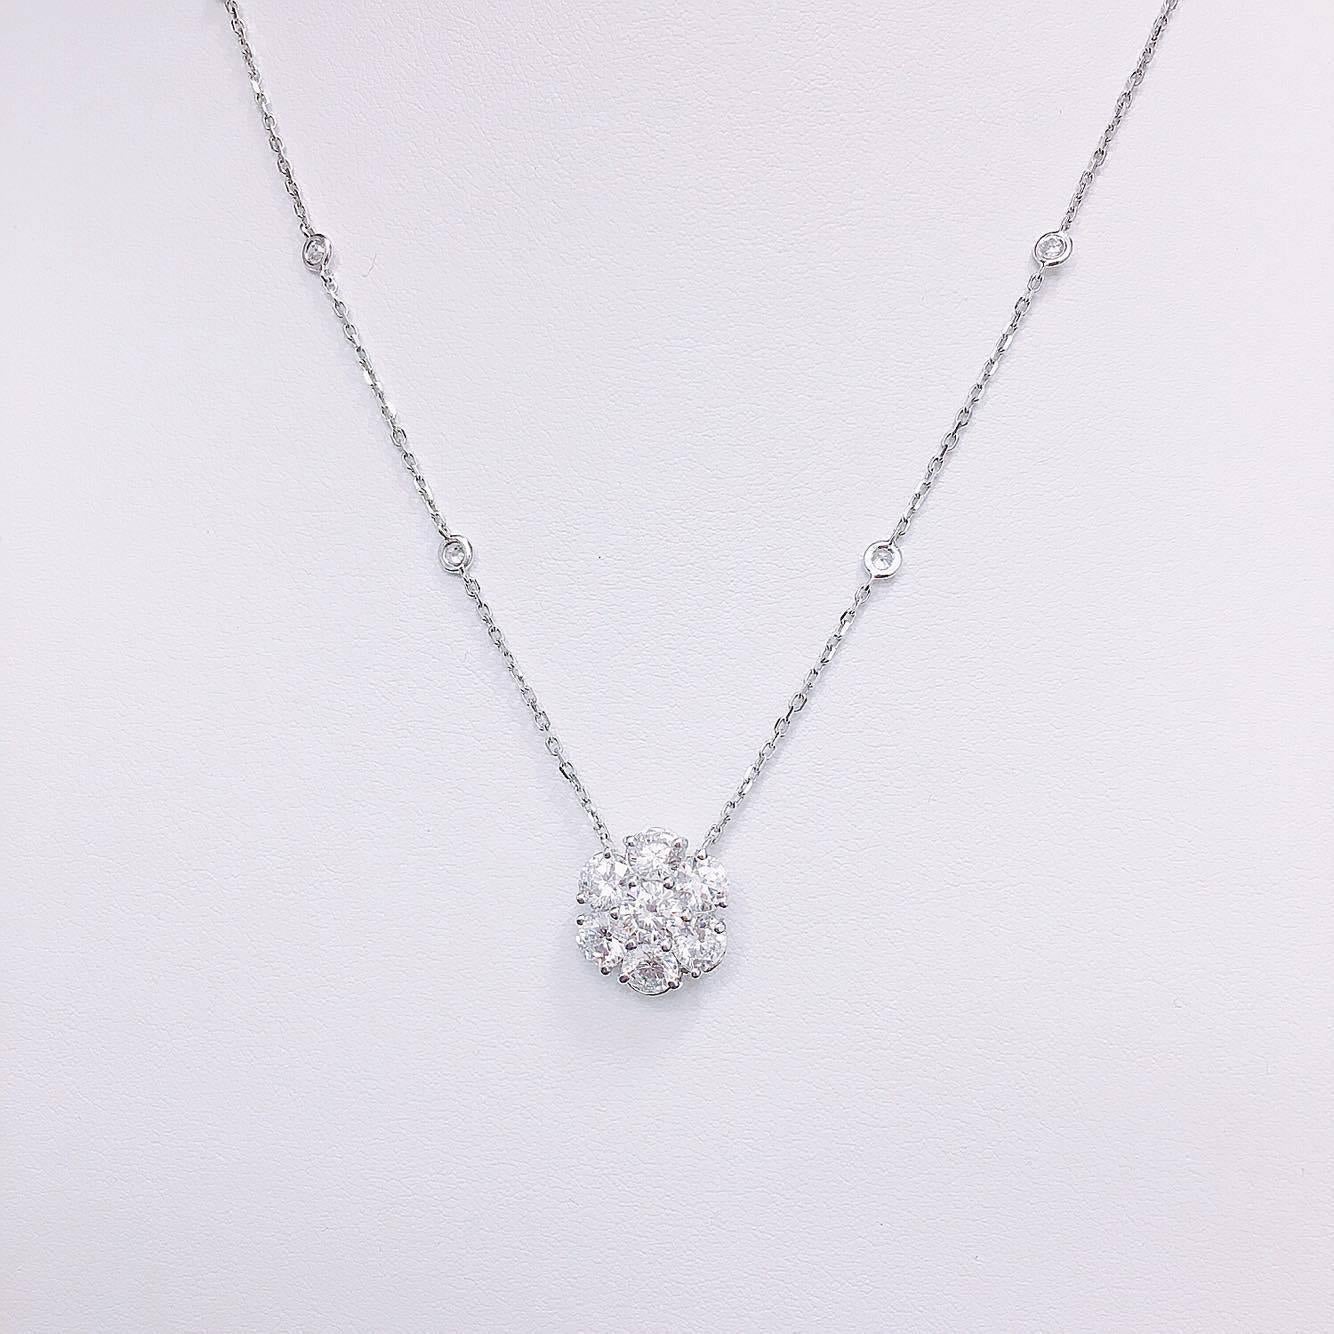 Large Diamonds in the center flower approx. 0.32ct each! Can be ordered in 14k or 18k white/yellow/rose gold as well.  Color: F  Clarity: Vs1  Cut: Excellent   If you would like to see a video of this lovely piece please send us a message and we